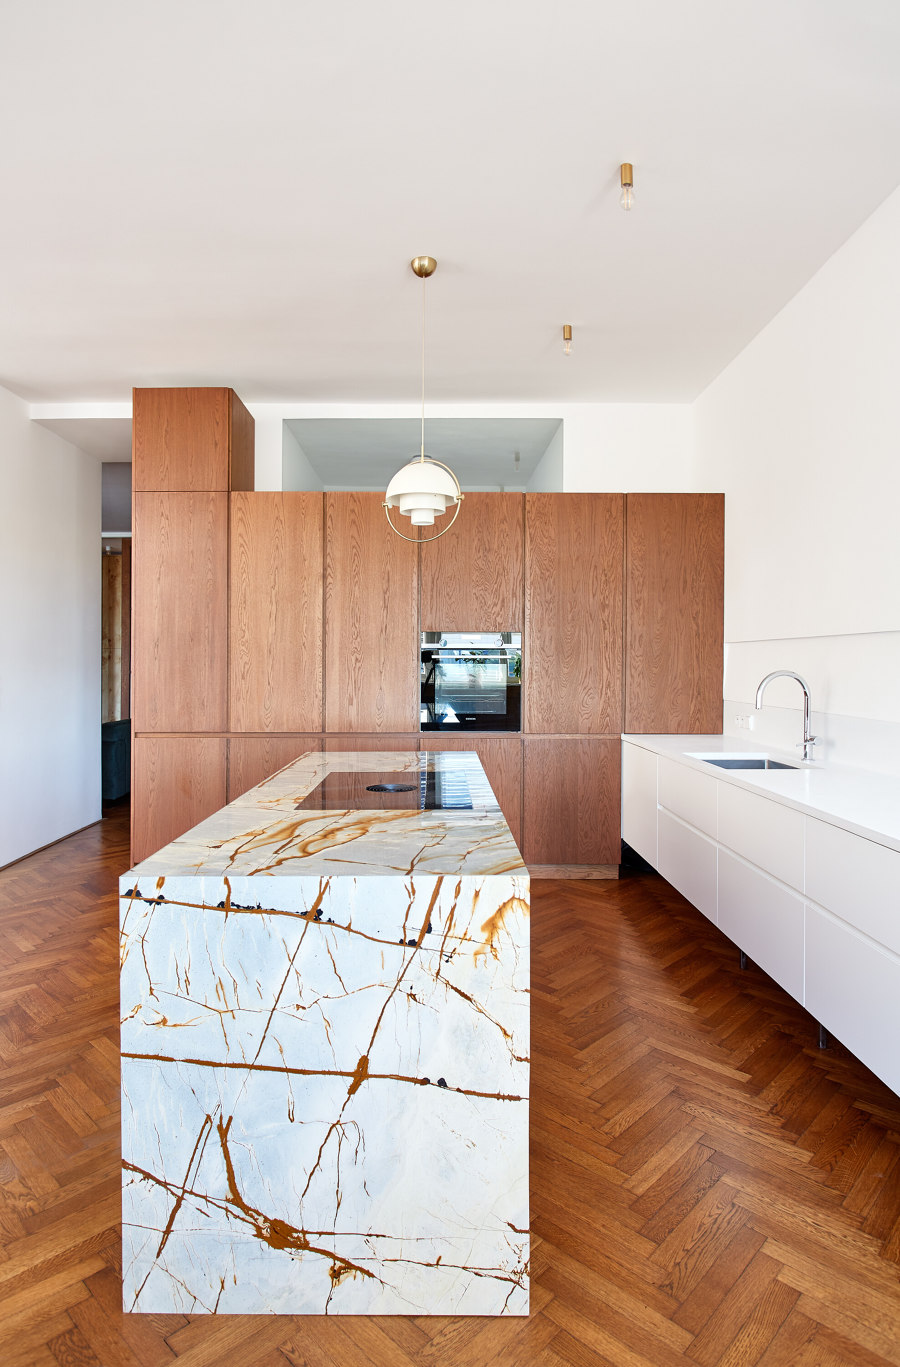 How to maximise the interior design value of a kitchen | Novedades